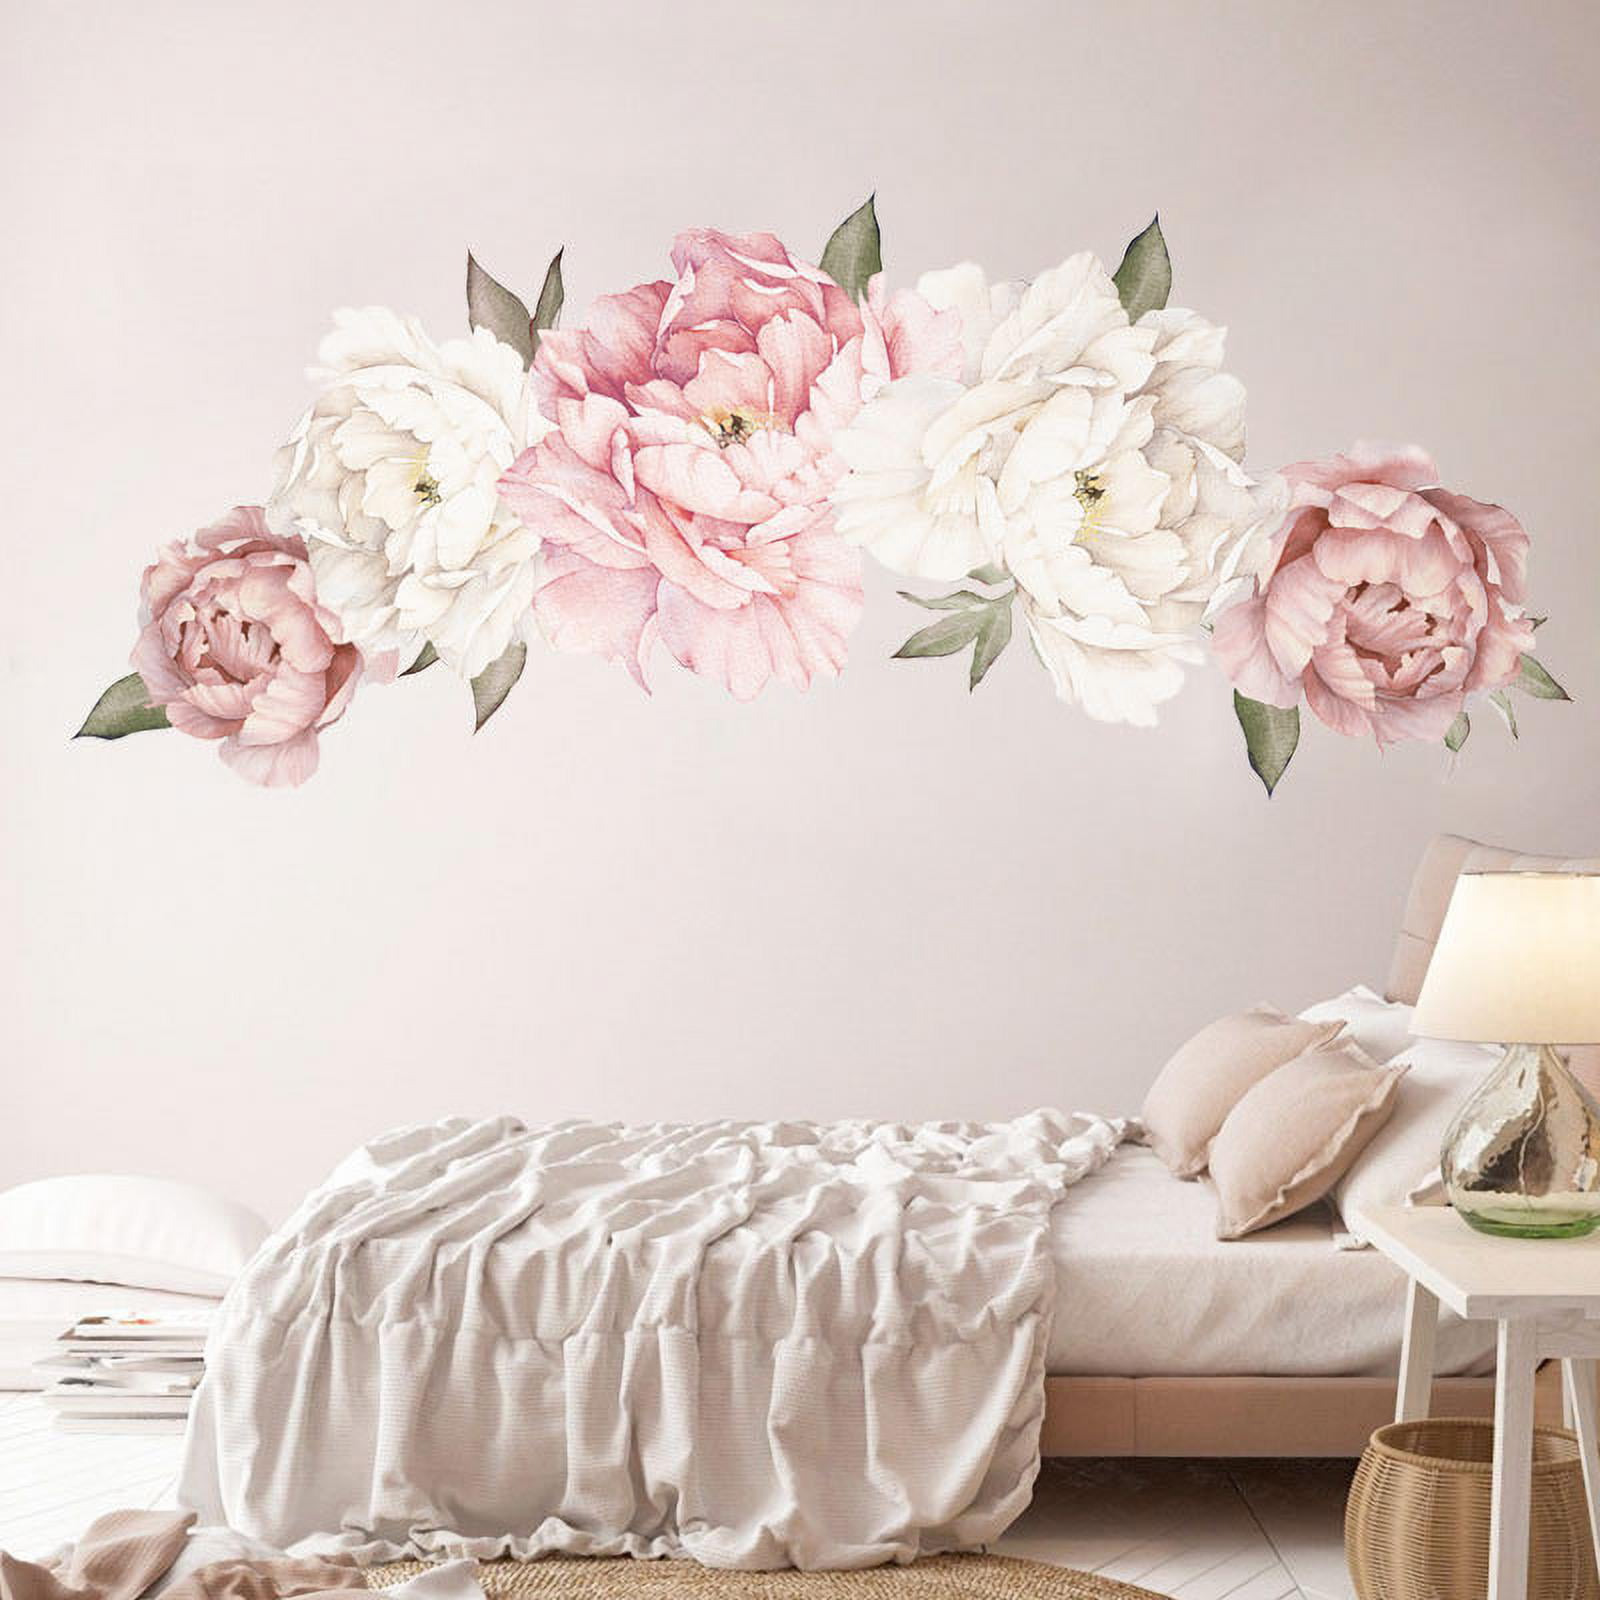 Pink Peony Flower Wall Stickers Baby Living Room Nursery Home Decor Mural Decal 